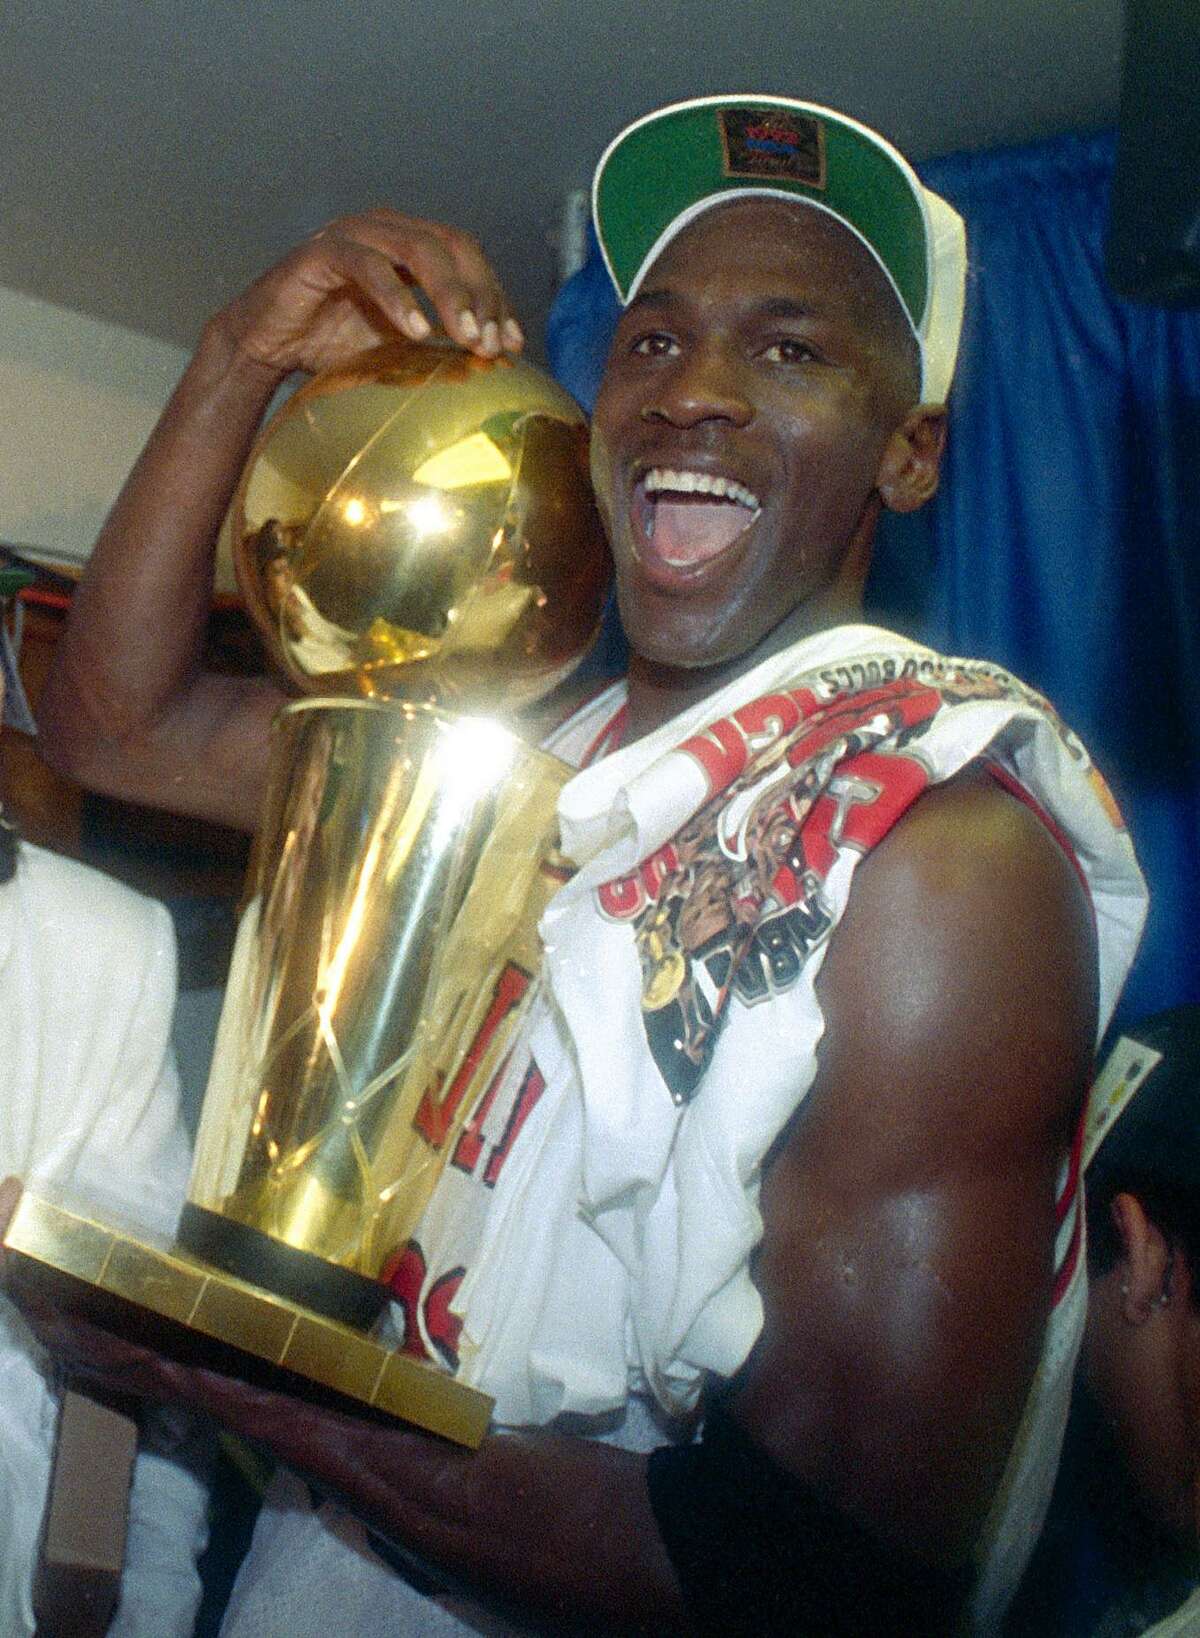 FILE -- This is a june 14, 1992 file photo showing Chicago Bulls' Michael Jordan celebrating with the NBA trophy after the Bulls beat the Portland Trail Blazers 97-93 in Chicago, to win their second straight NBA title. On Friday, Sept. 11, 2009, Jordan will be enshrined at the Basketball Hall of Fame. (AP Photo/Mark Duncan, File)